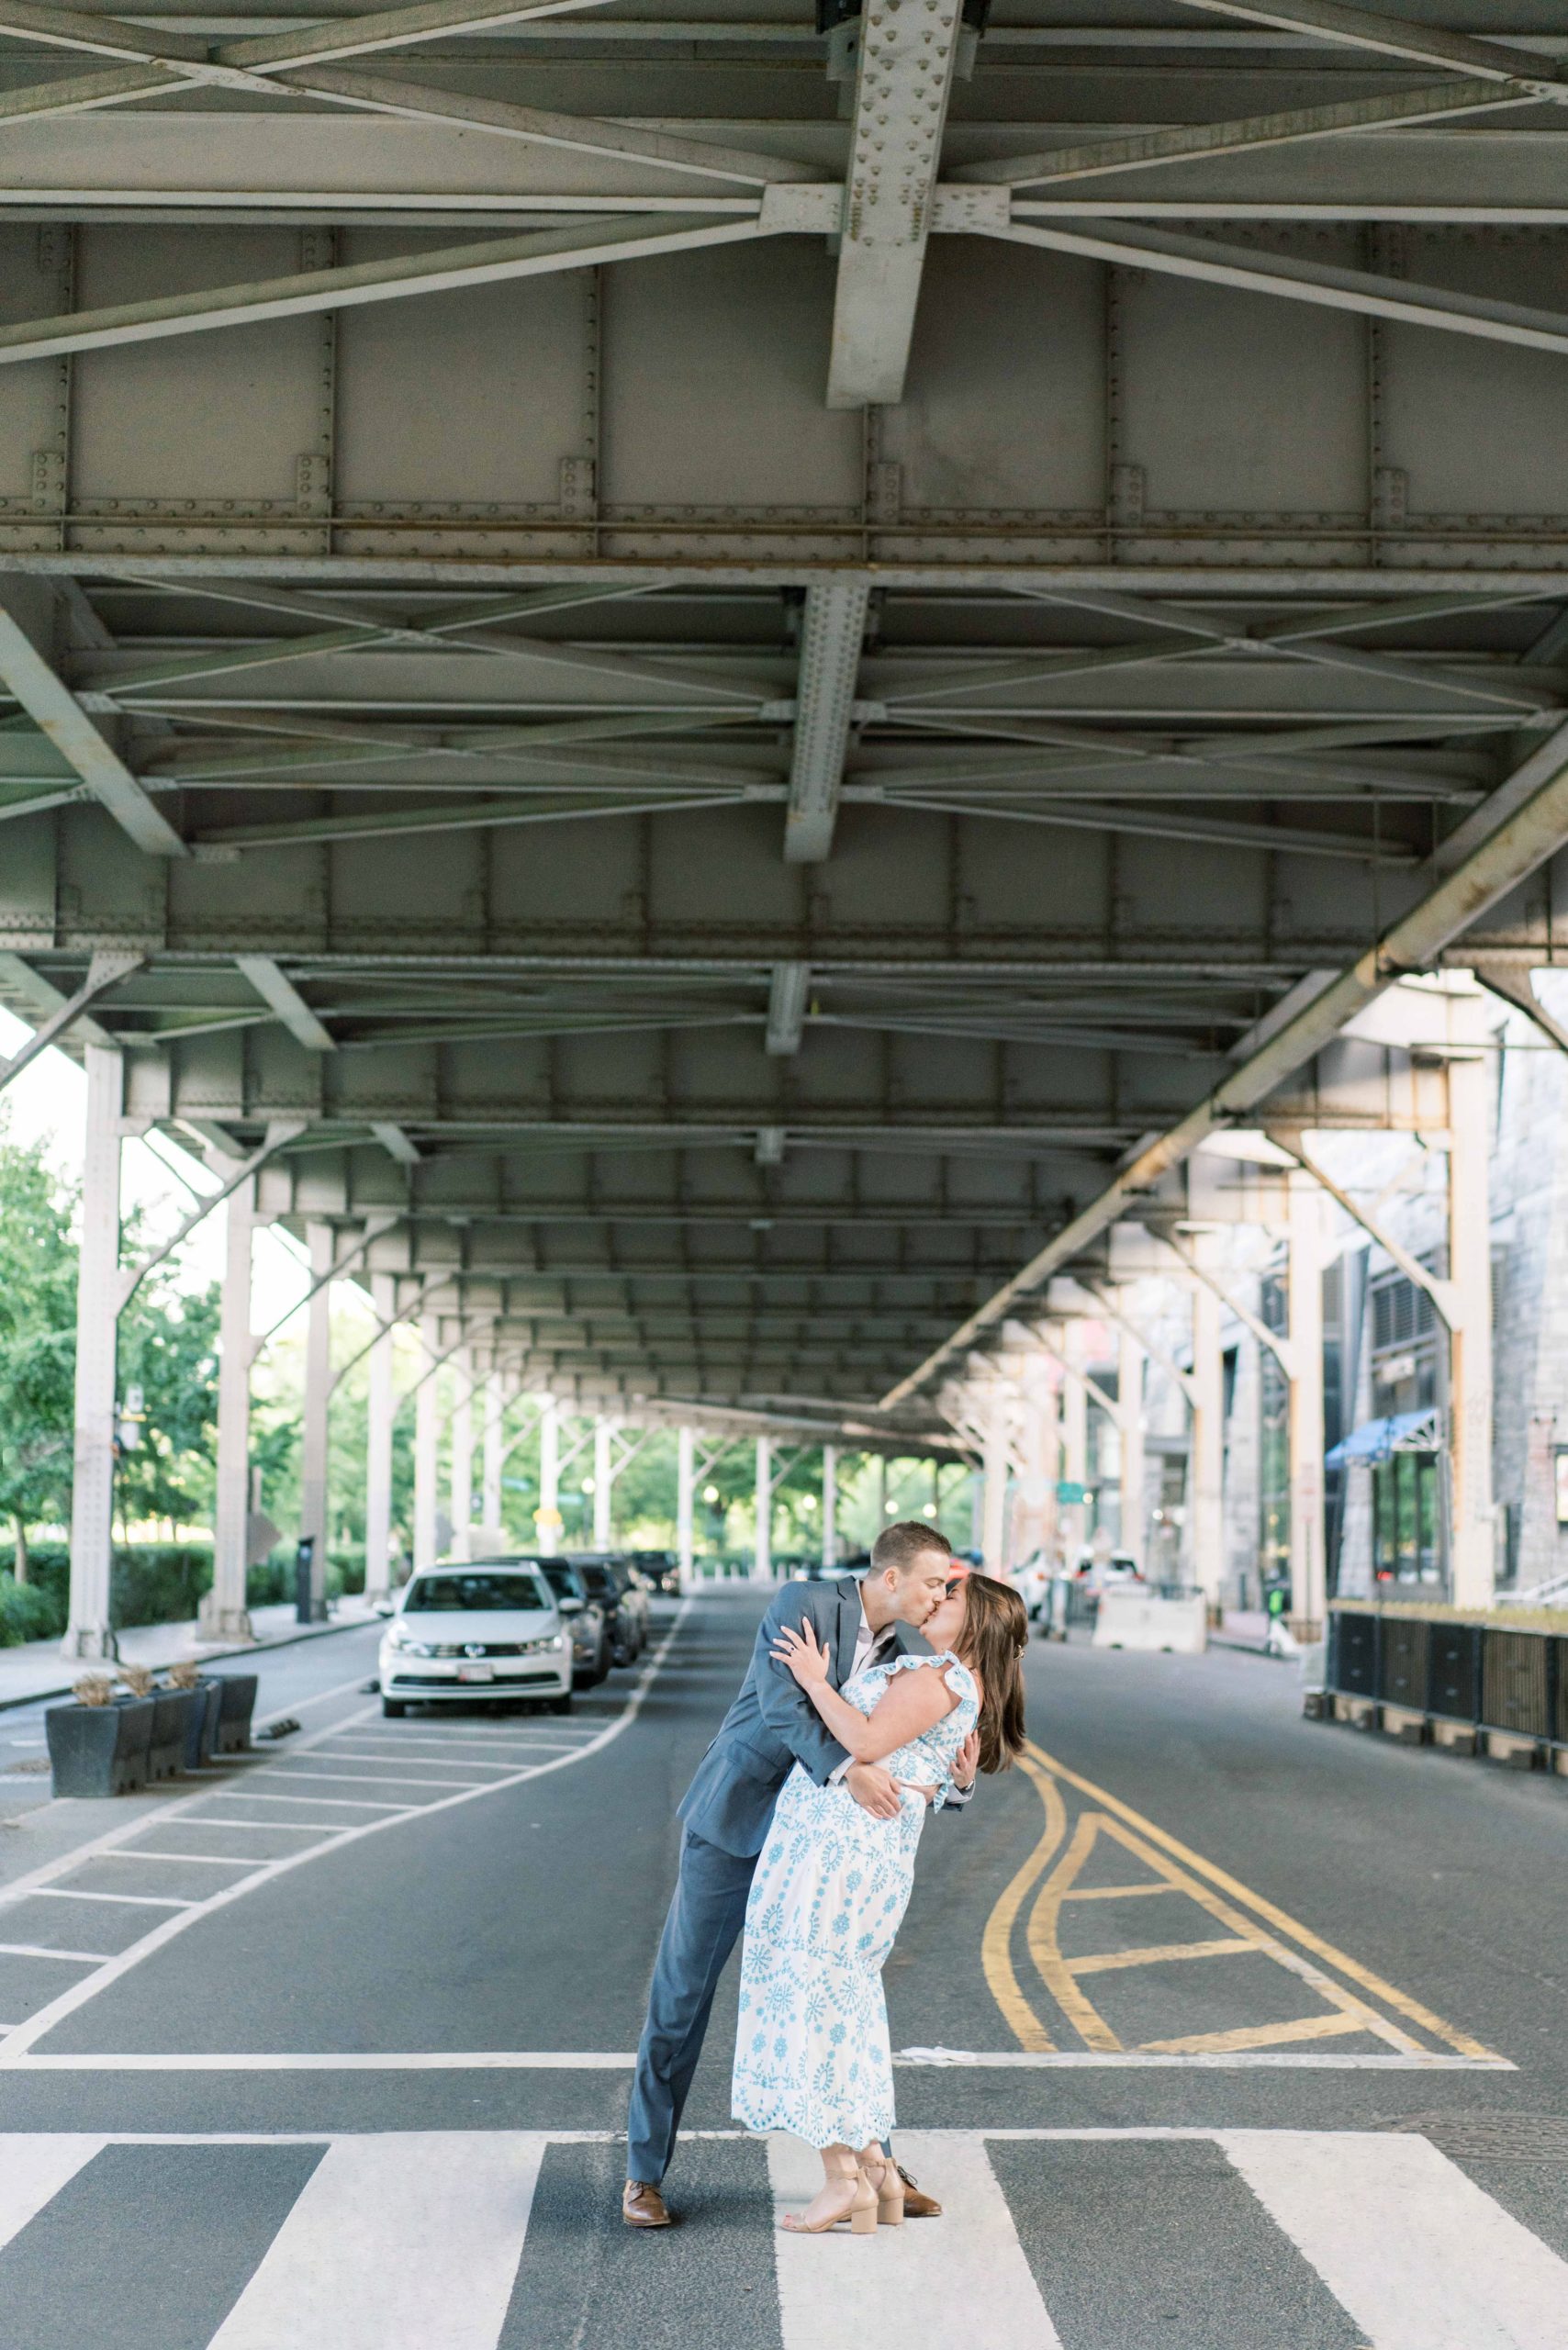 A sunrise engagement session in Georgetown, Washington, DC near the canal, waterfront, and iconic townhomes.